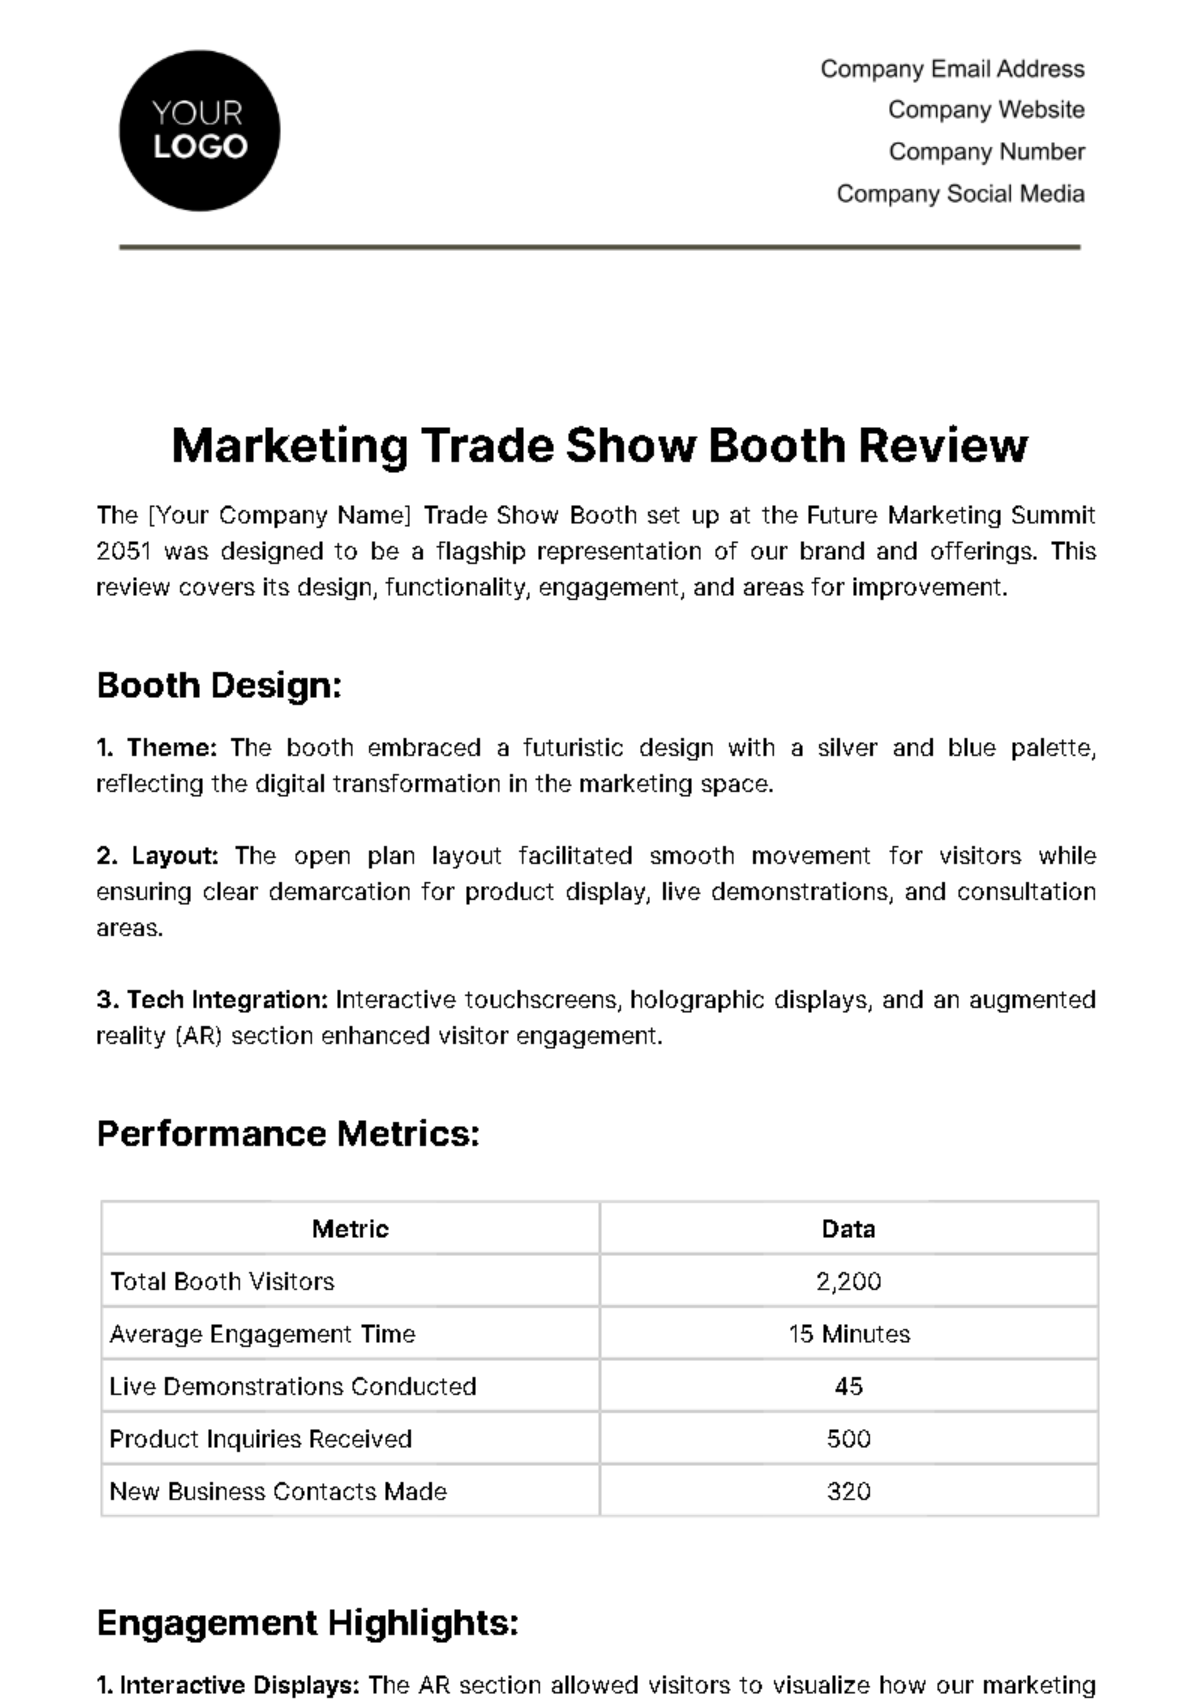 Free Marketing Trade Show Booth Review Template